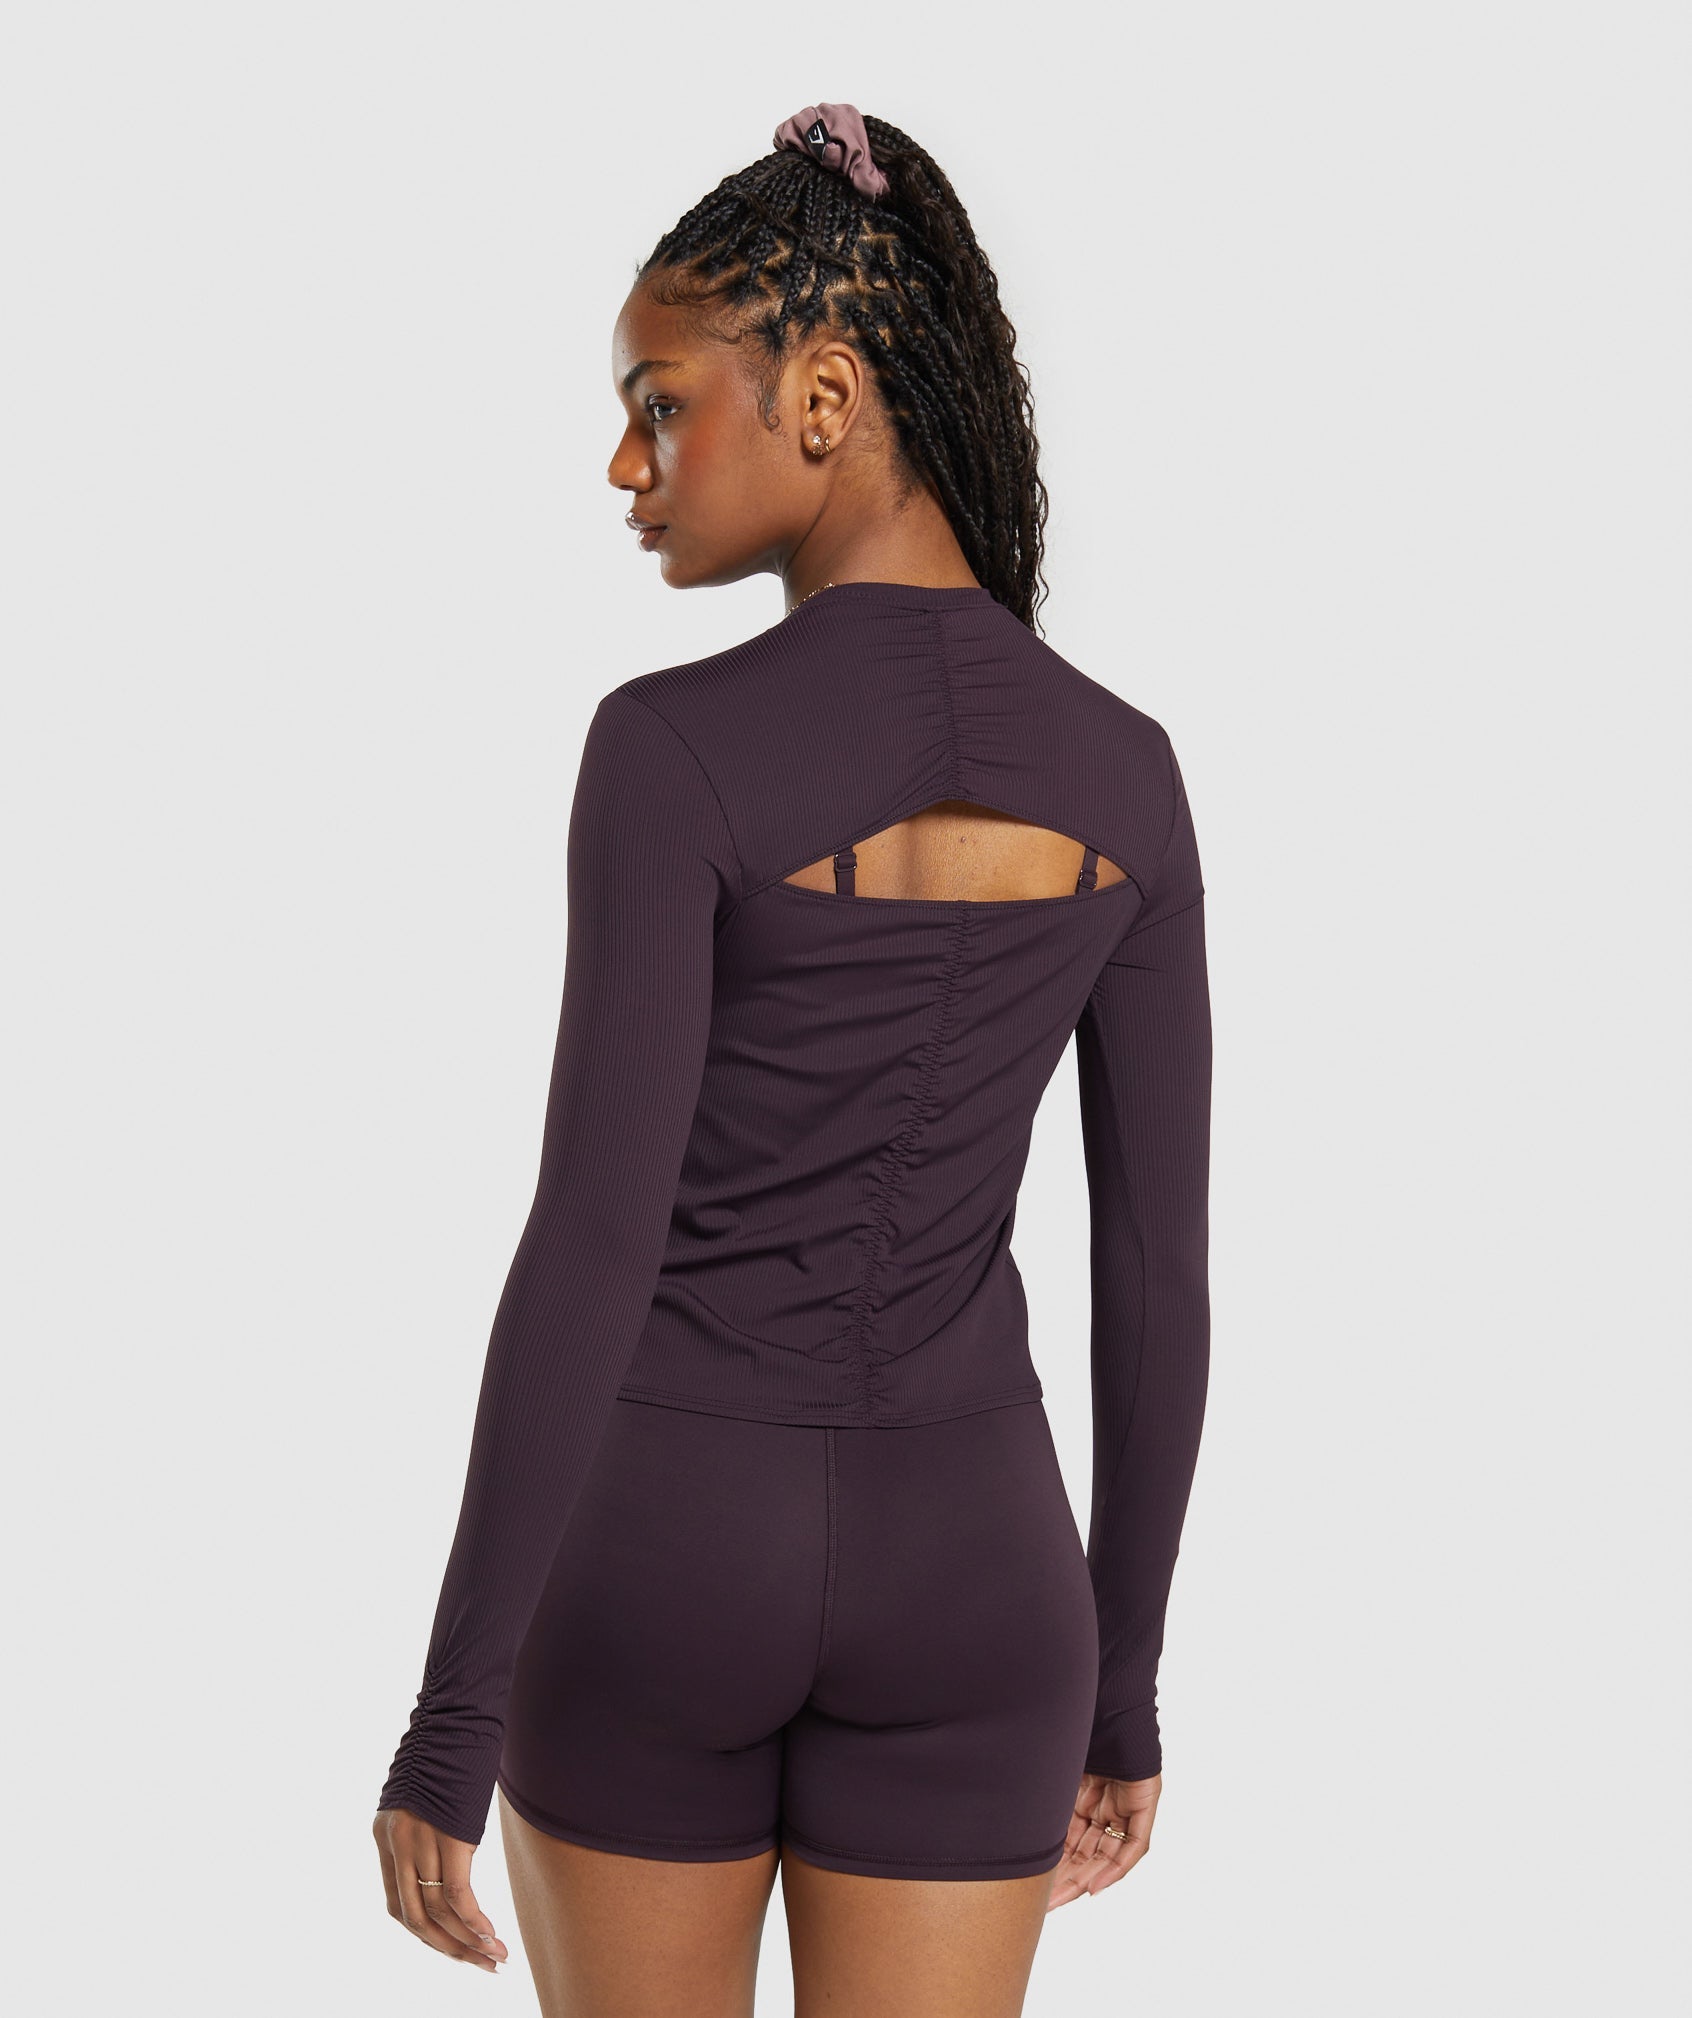 Elevate Long Sleeve Ruched Top in Plum Brown - view 2